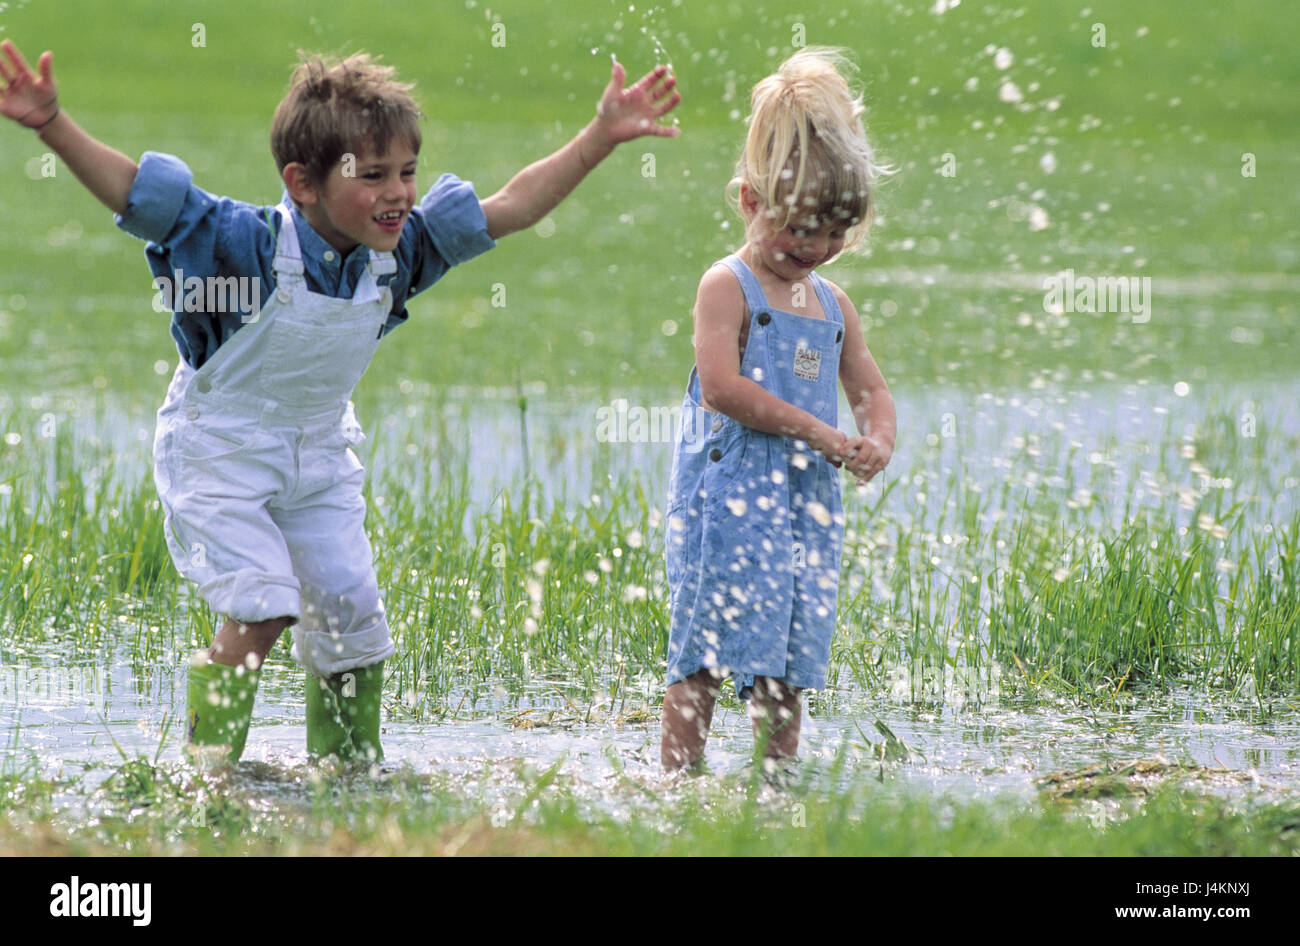 Meadow, water, boy, girl, fun, run summer, holidays, children, friends, two, childhood, carefree nature, brother, sister, siblings, fun, jump, splash, play together, with each other, Stock Photo